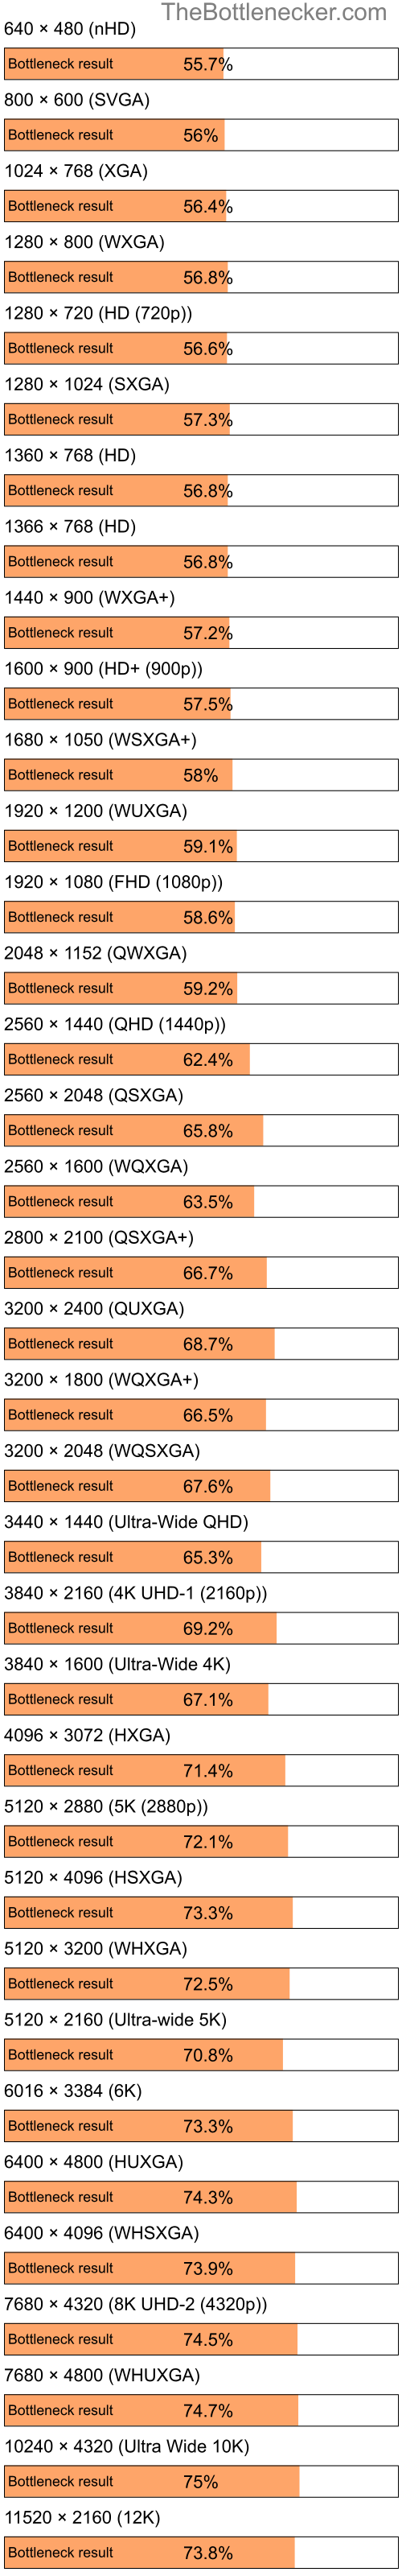 Bottleneck results by resolution for Intel Atom Z520 and NVIDIA GeForce 9500M GS in General Tasks